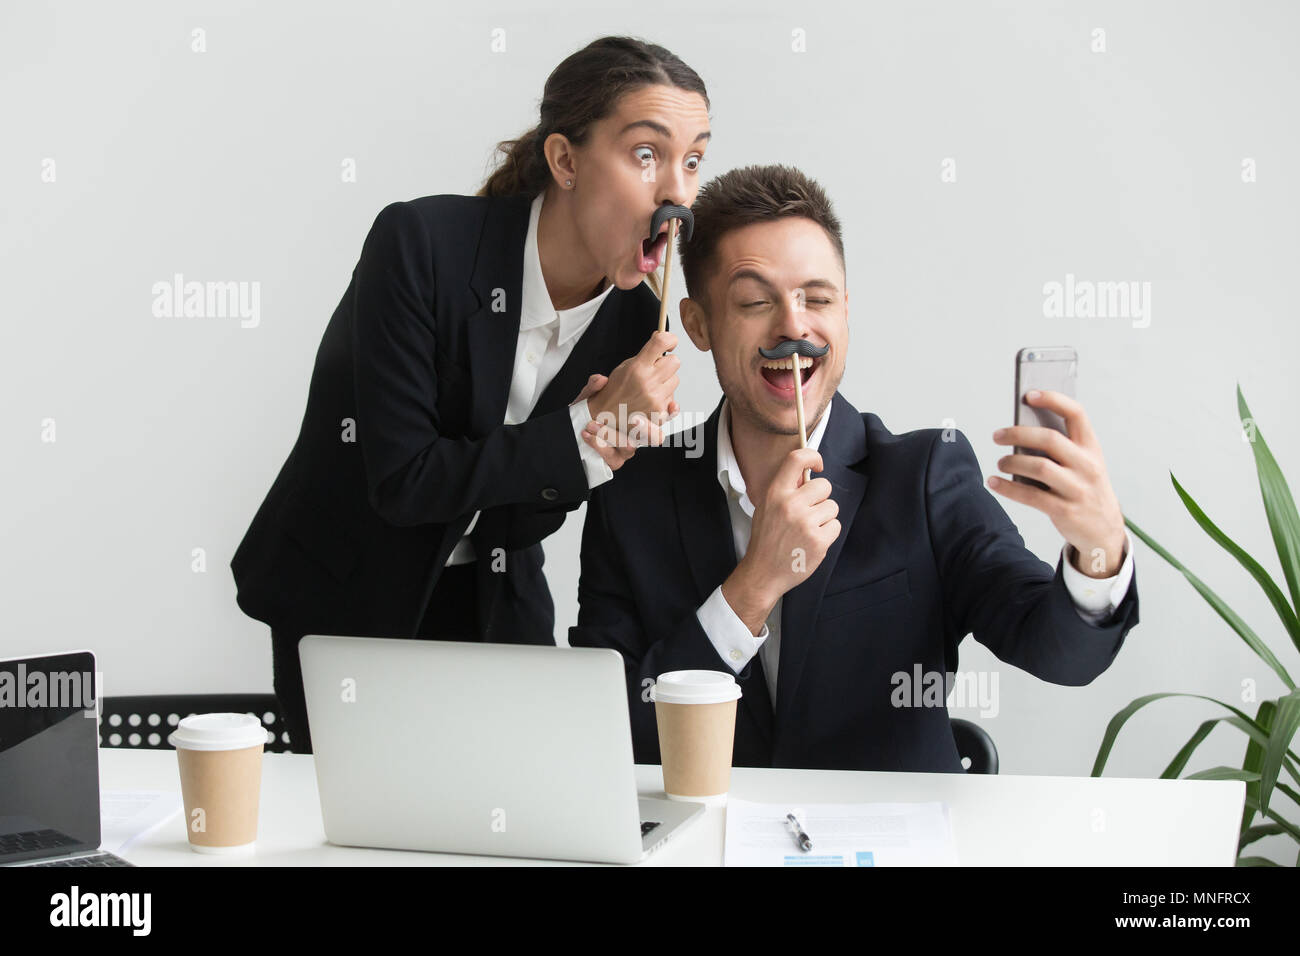 Colleagues making self-portrait with mustache accessory Stock Photo